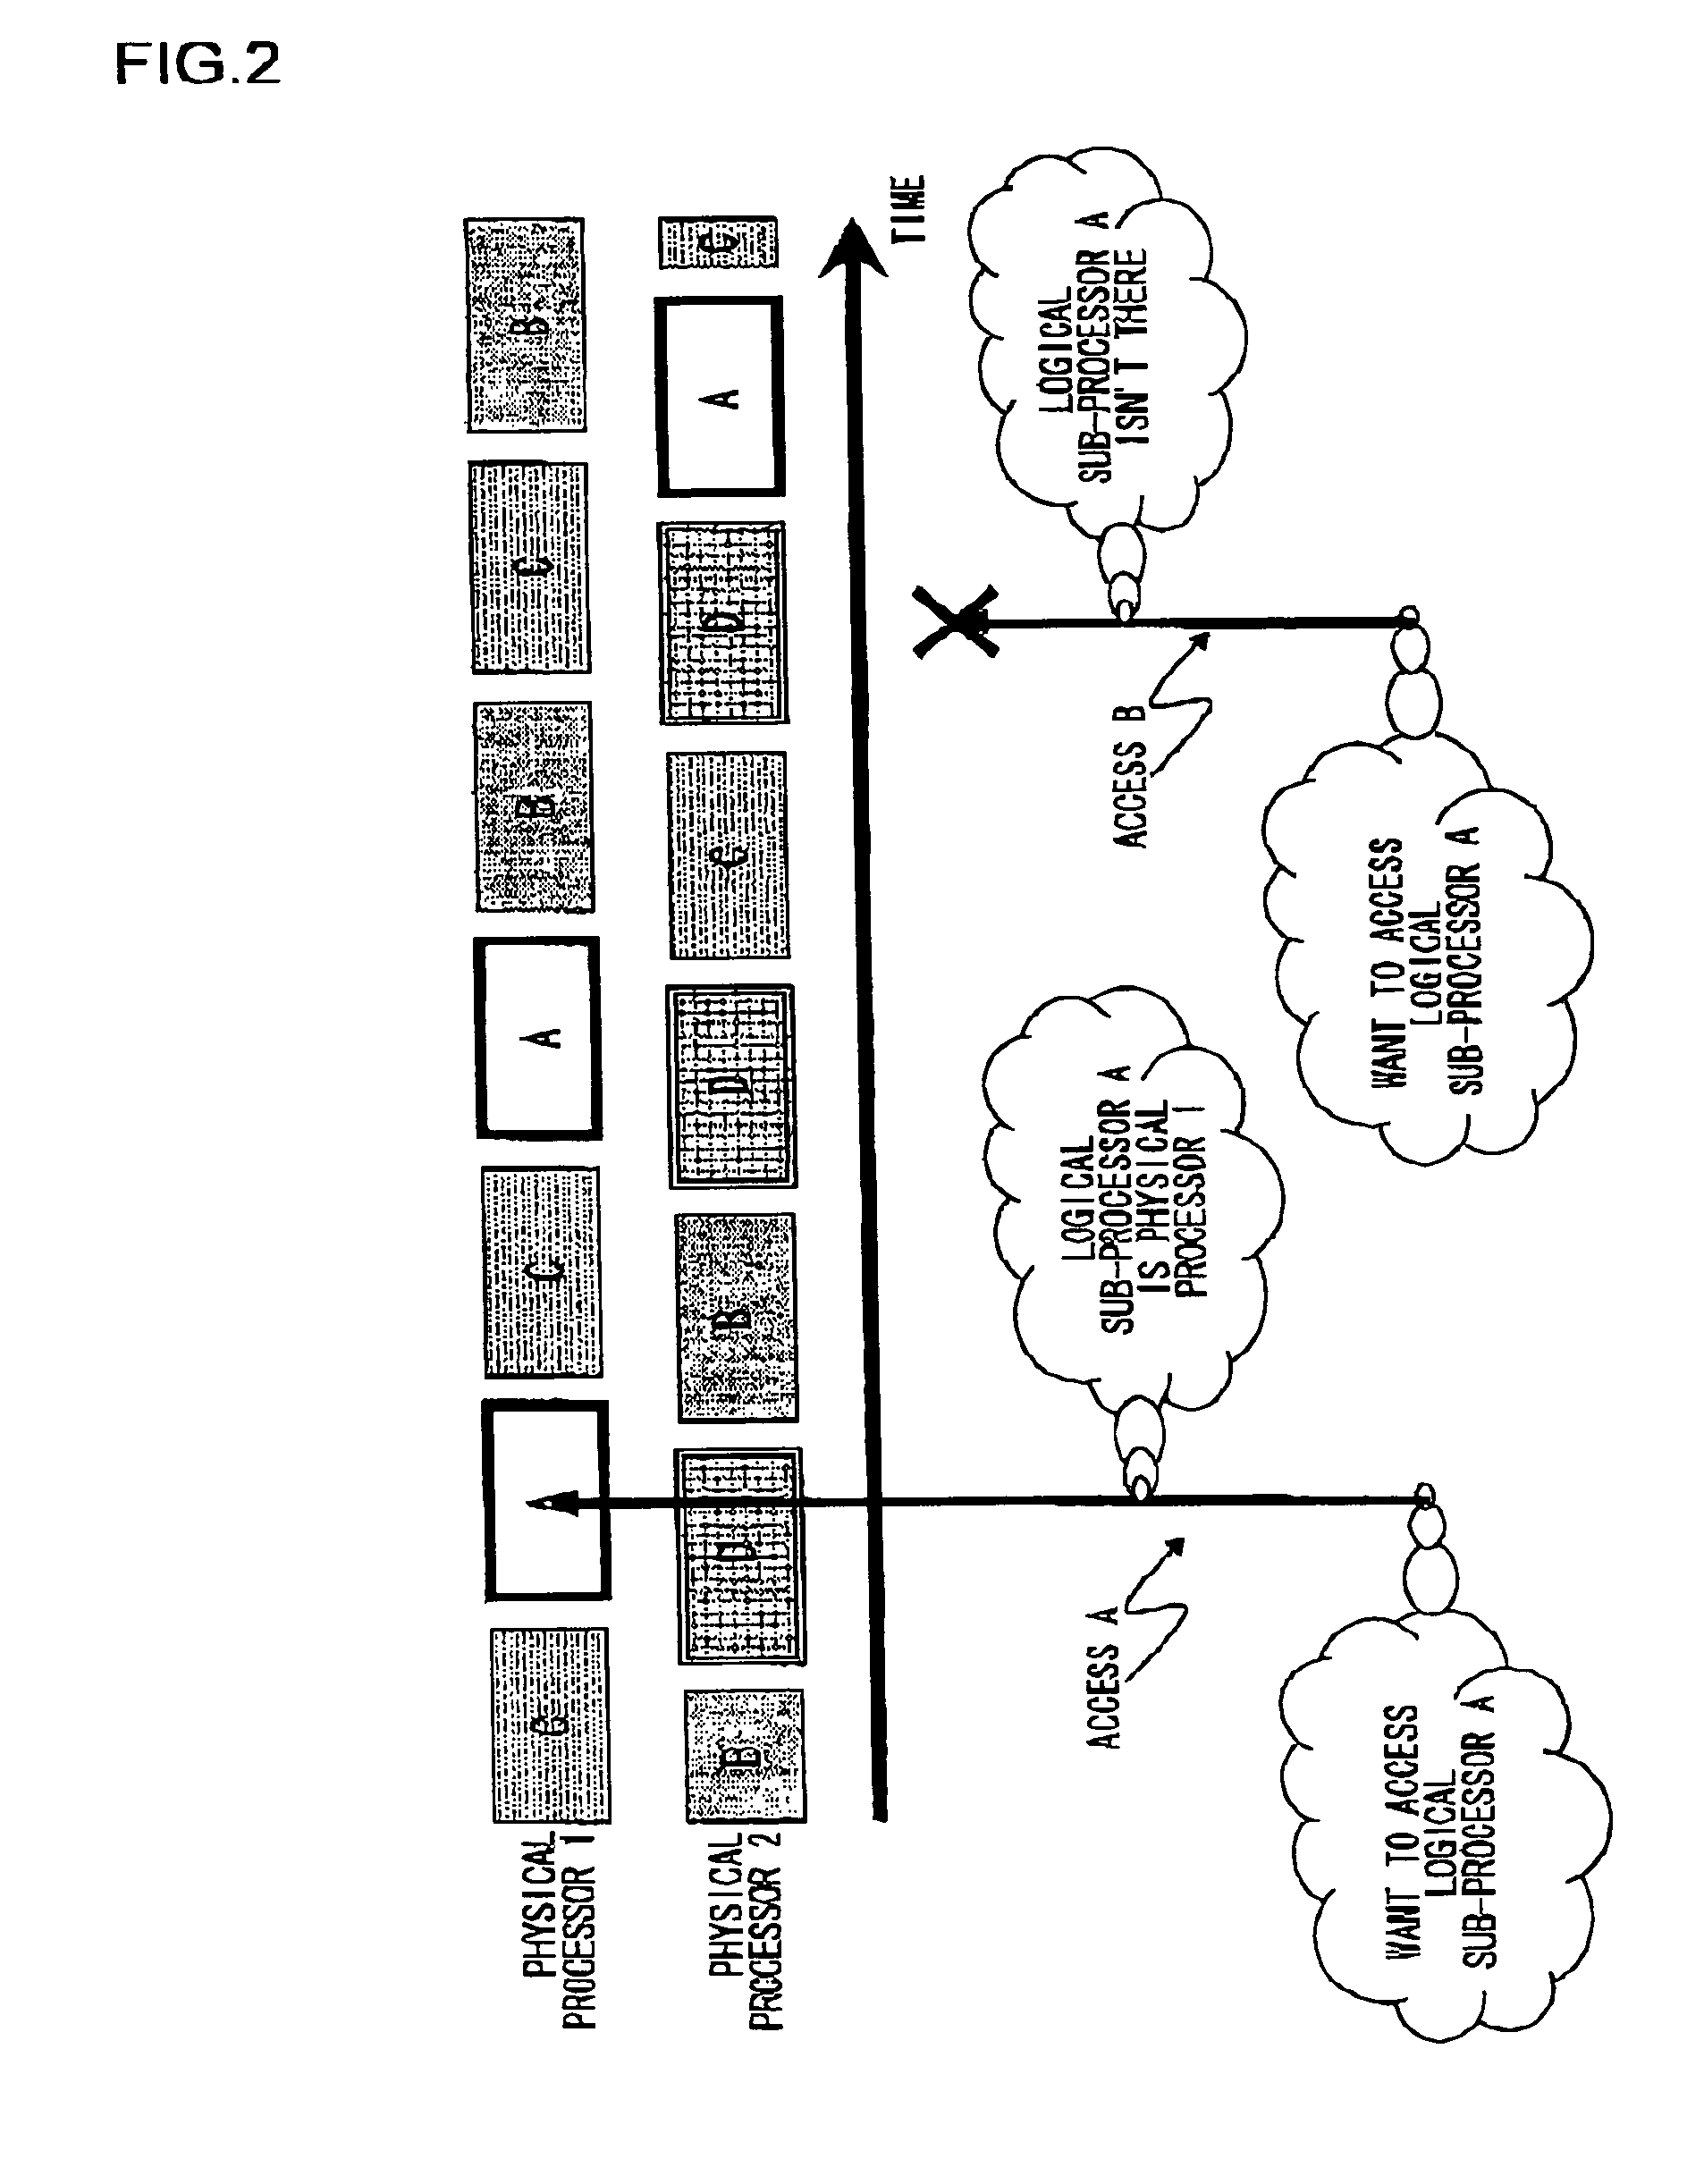 Accessing copy information of MMIO register by guest OS in both active and inactive state of a designated logical processor corresponding to the guest OS